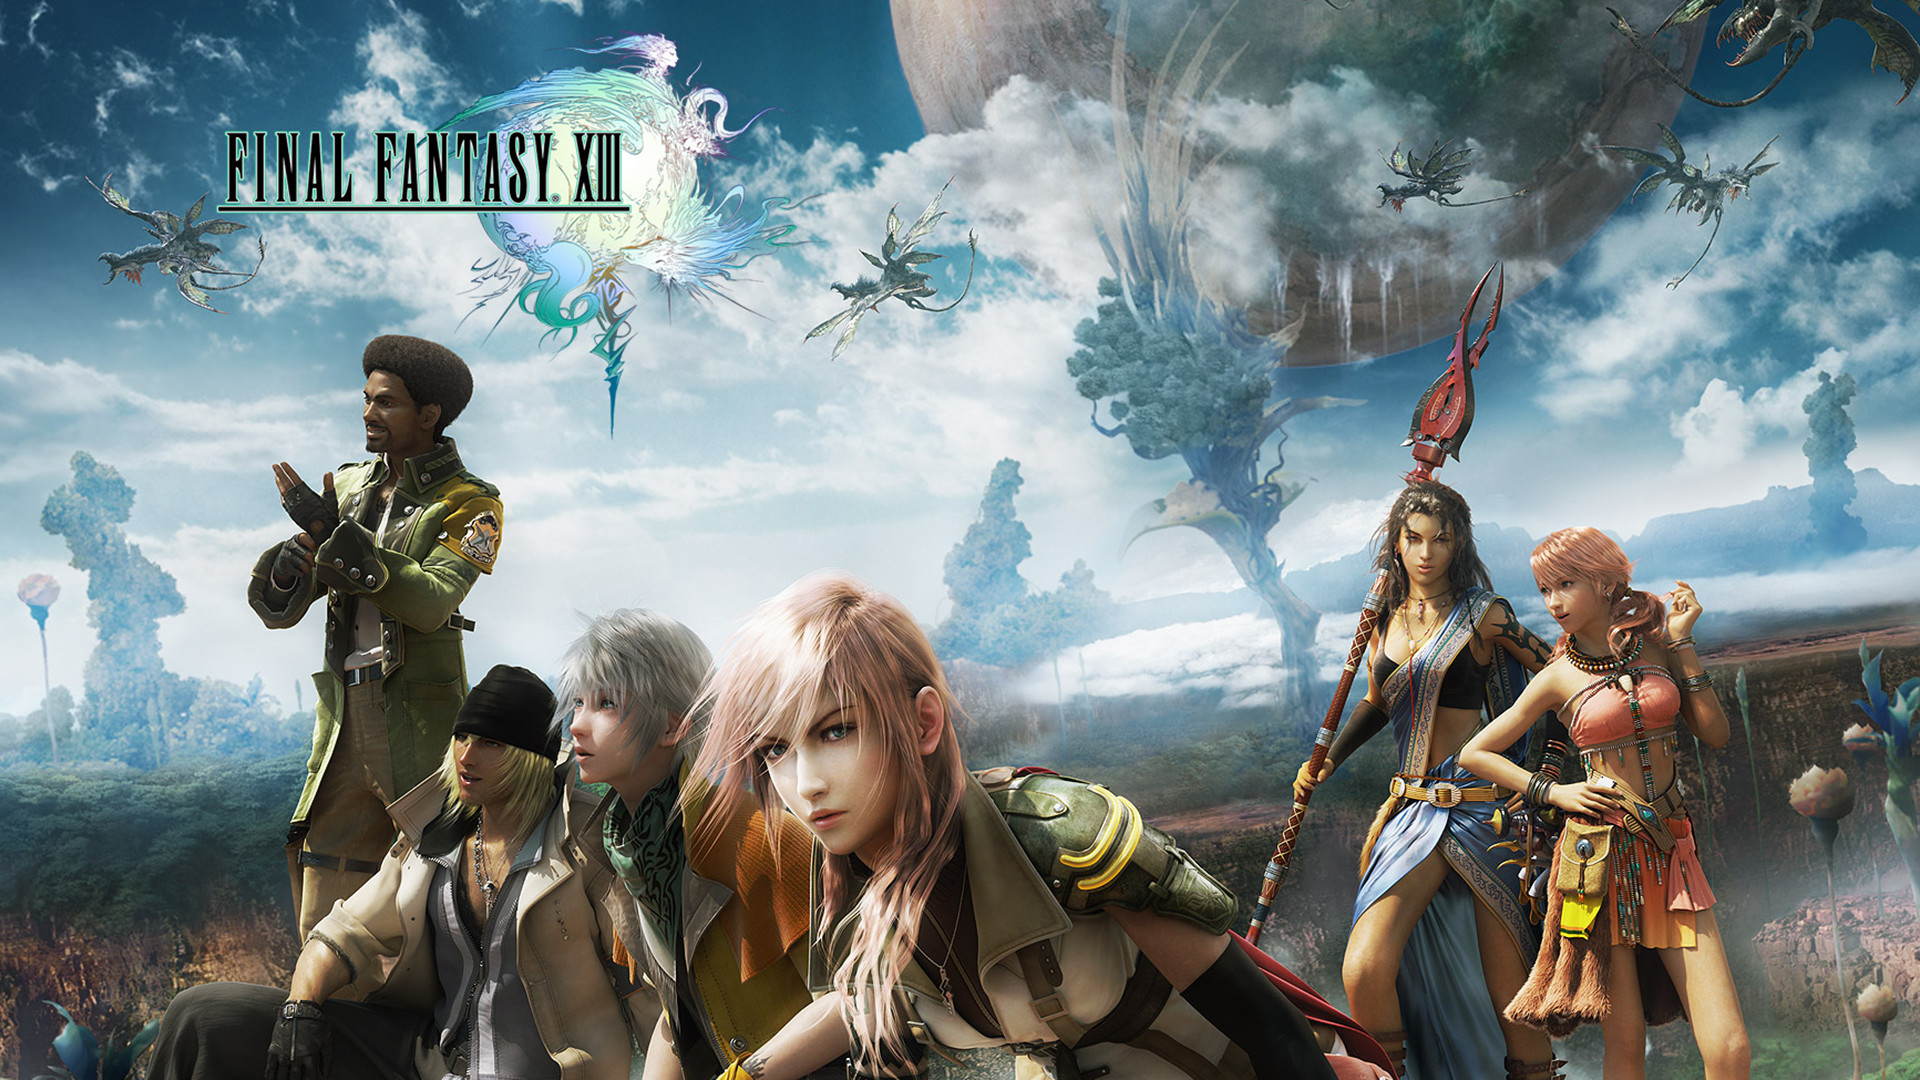 1920x1080 7025839 final fantasy 13 wallpaper hd hd desktop wallpapers amazing hd  download apple background wallpapers colourfull display lovely wallpapers  1920Ã1080 ...